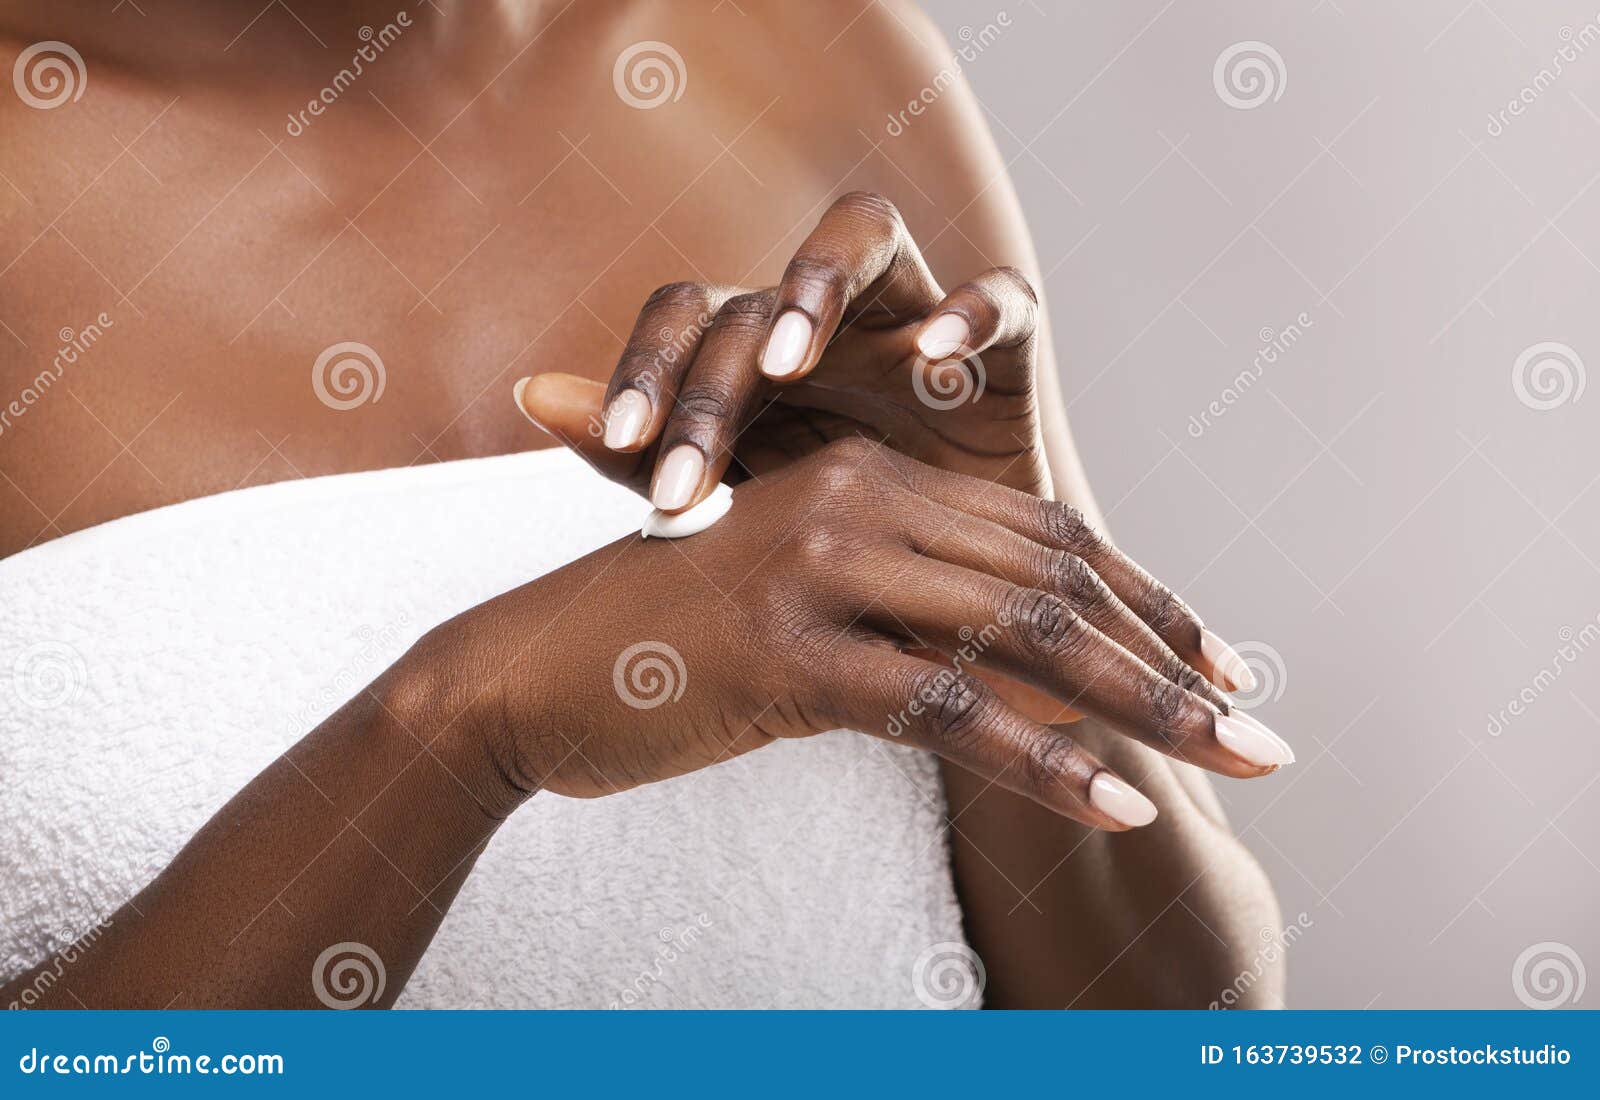 unrecognizable african american woman applying lotion to her hands, closeup